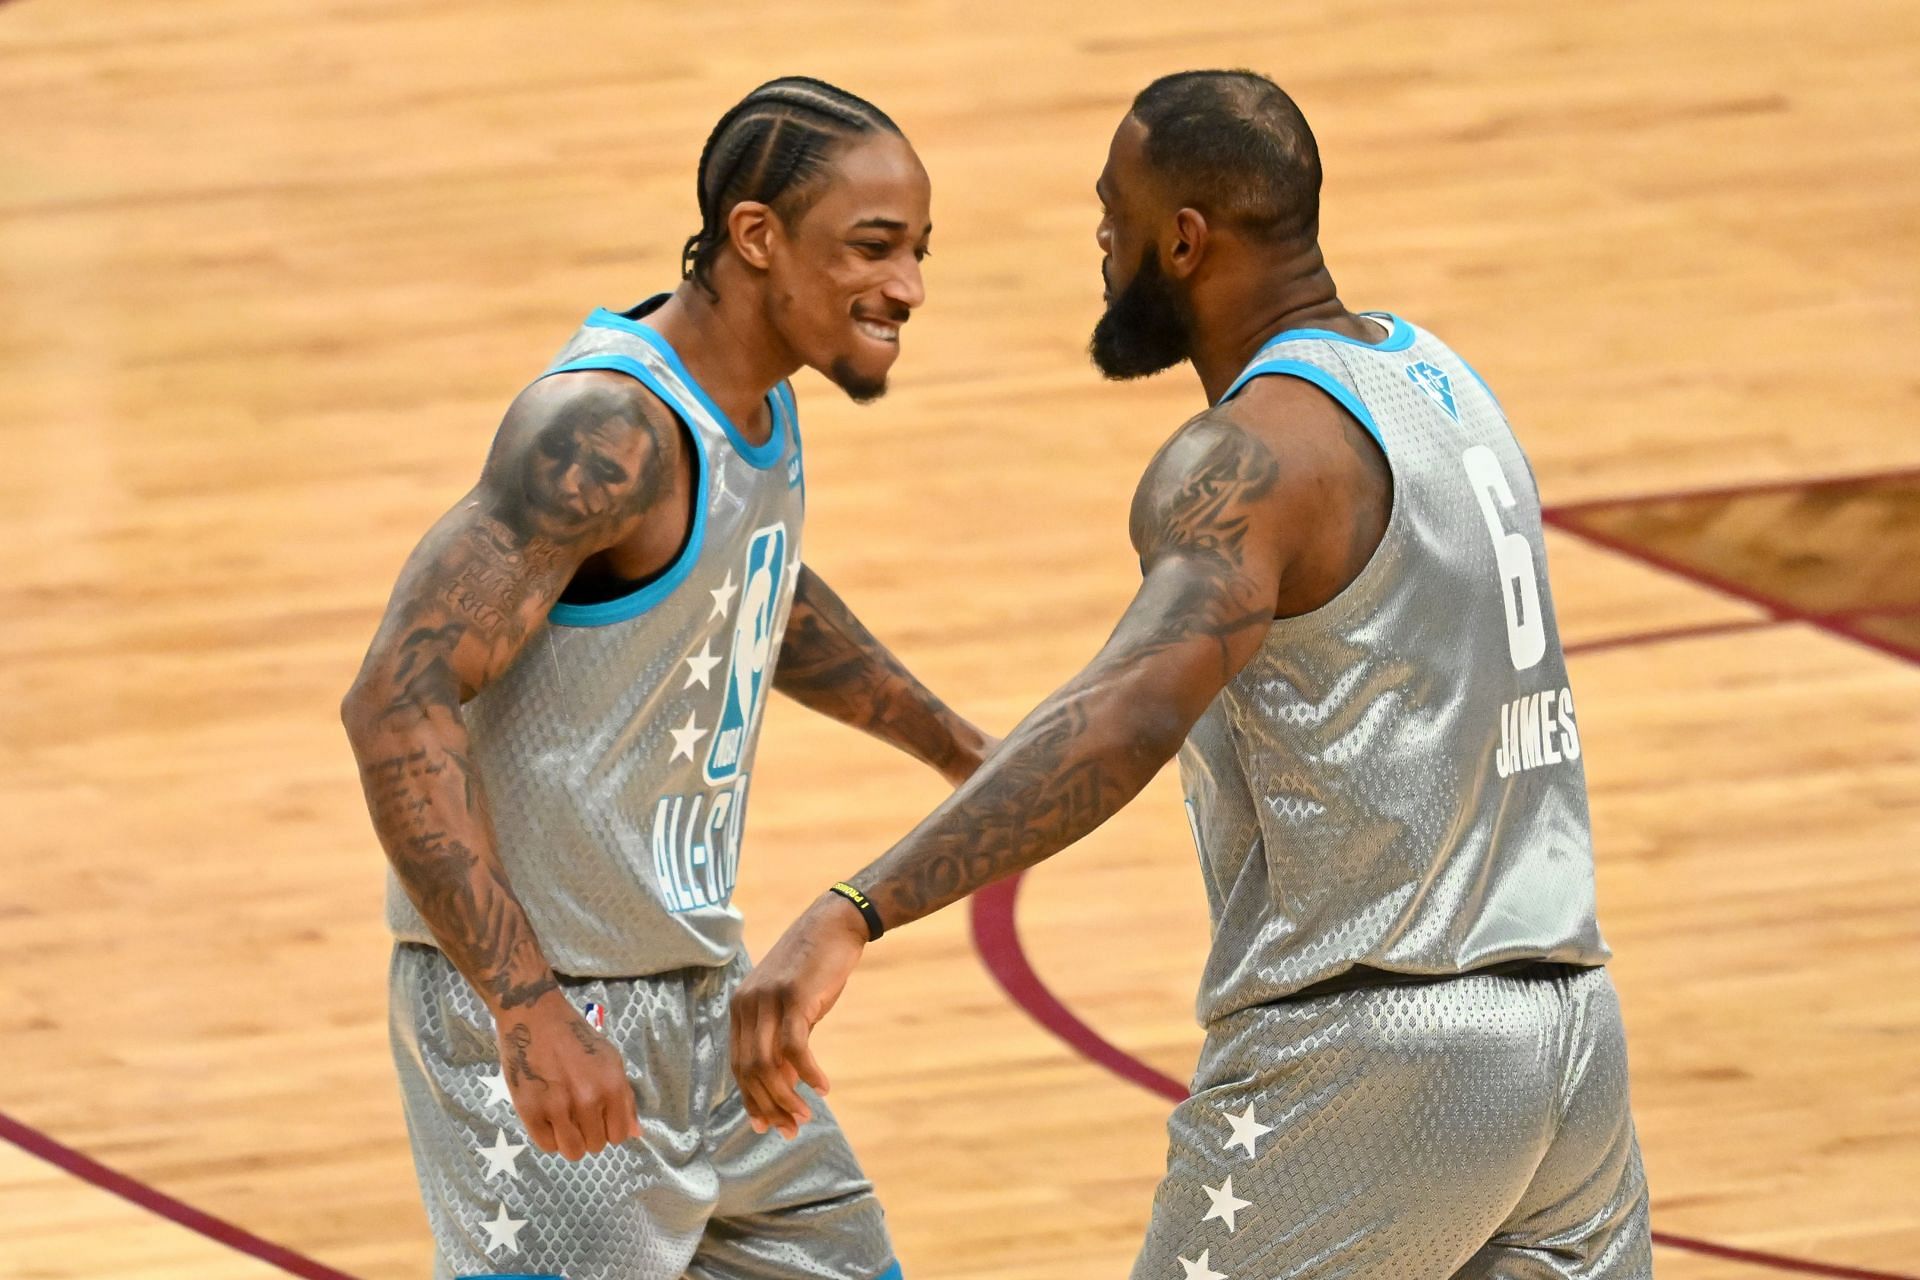 DeMar DeRozan #11 and LeBron James #6 of Team LeBron celebrate after defeating Team Durant 163-160.